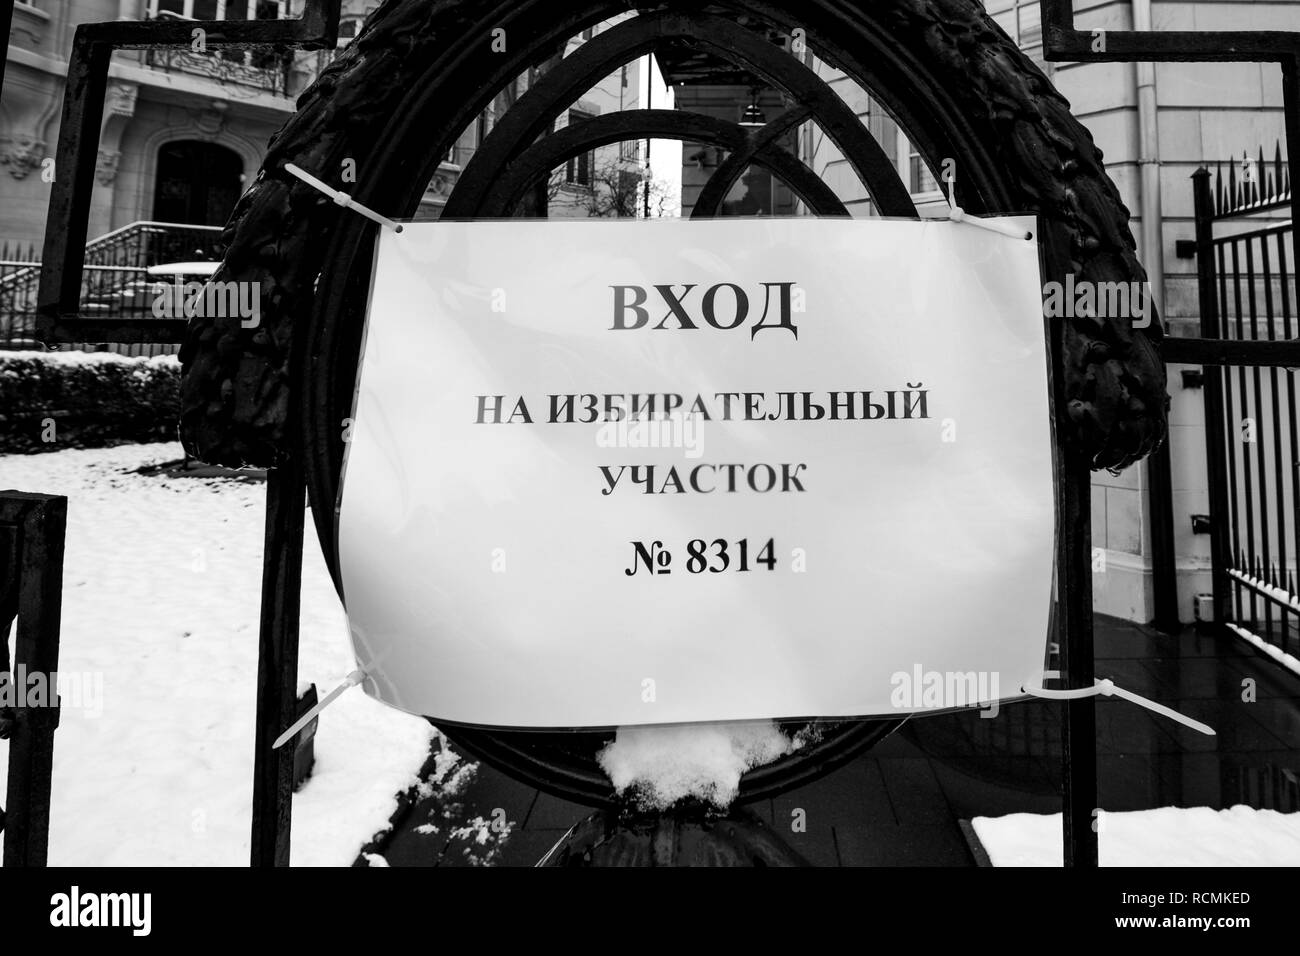 STRASBOURG, FRANCE - MAR 18, 2018: Polling station sign on the gate of Consulate General of the Russian Federation to vote for President Russian presidential election 2018 - black and white  Stock Photo